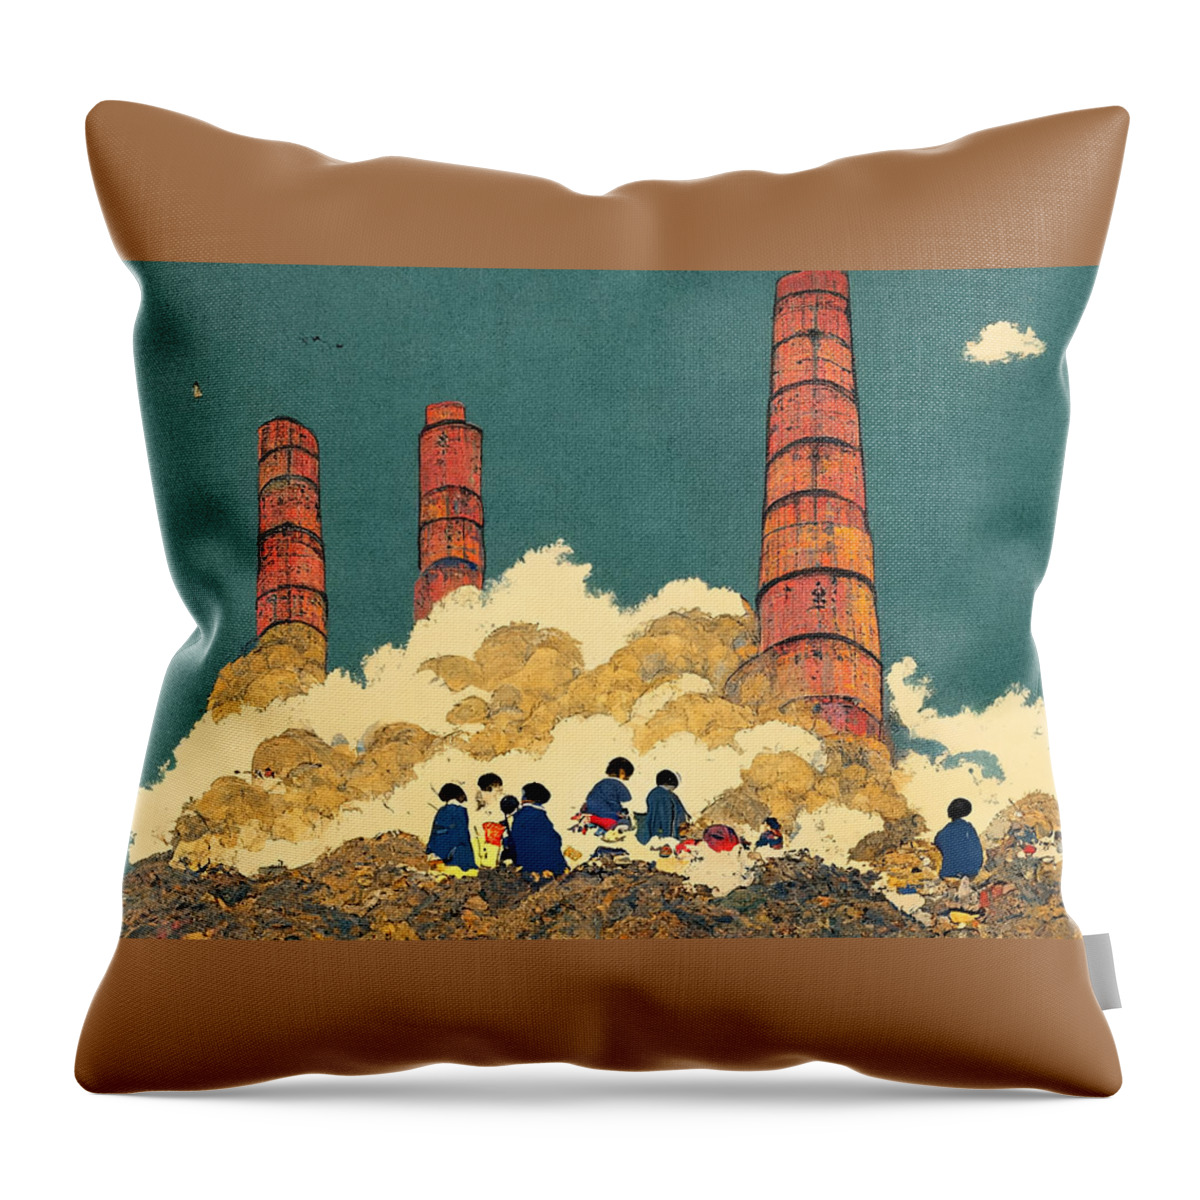 Winner Throw Pillow featuring the painting Back Of Children In Cloak Garbage Pile Chimneyt D6aed931 0806 813c 9011 E6533b59d959 by MotionAge Designs